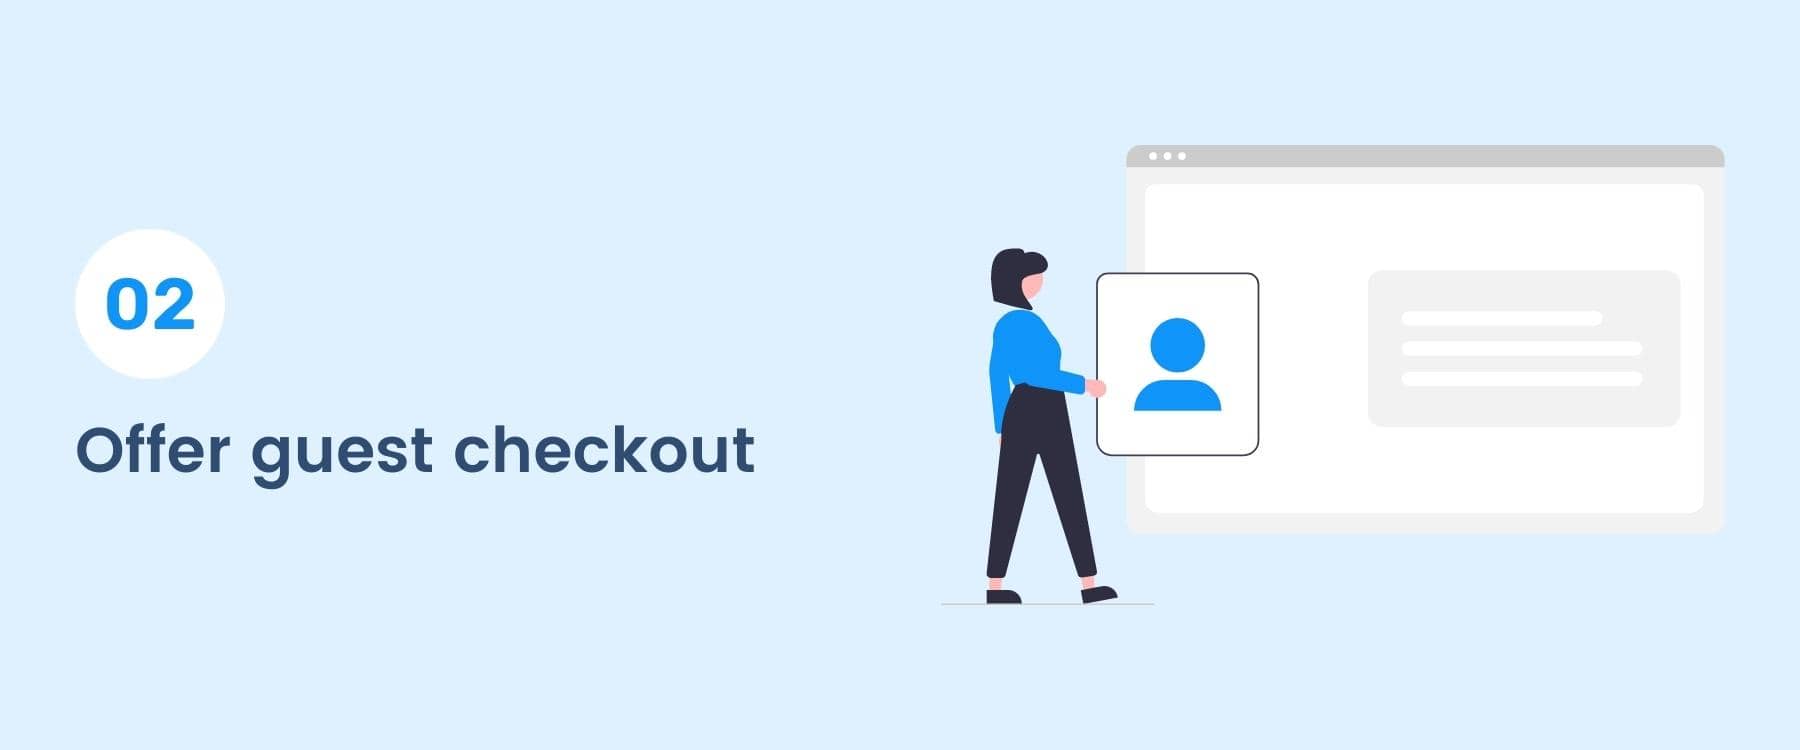 Add security badges or social proof on the checkout page